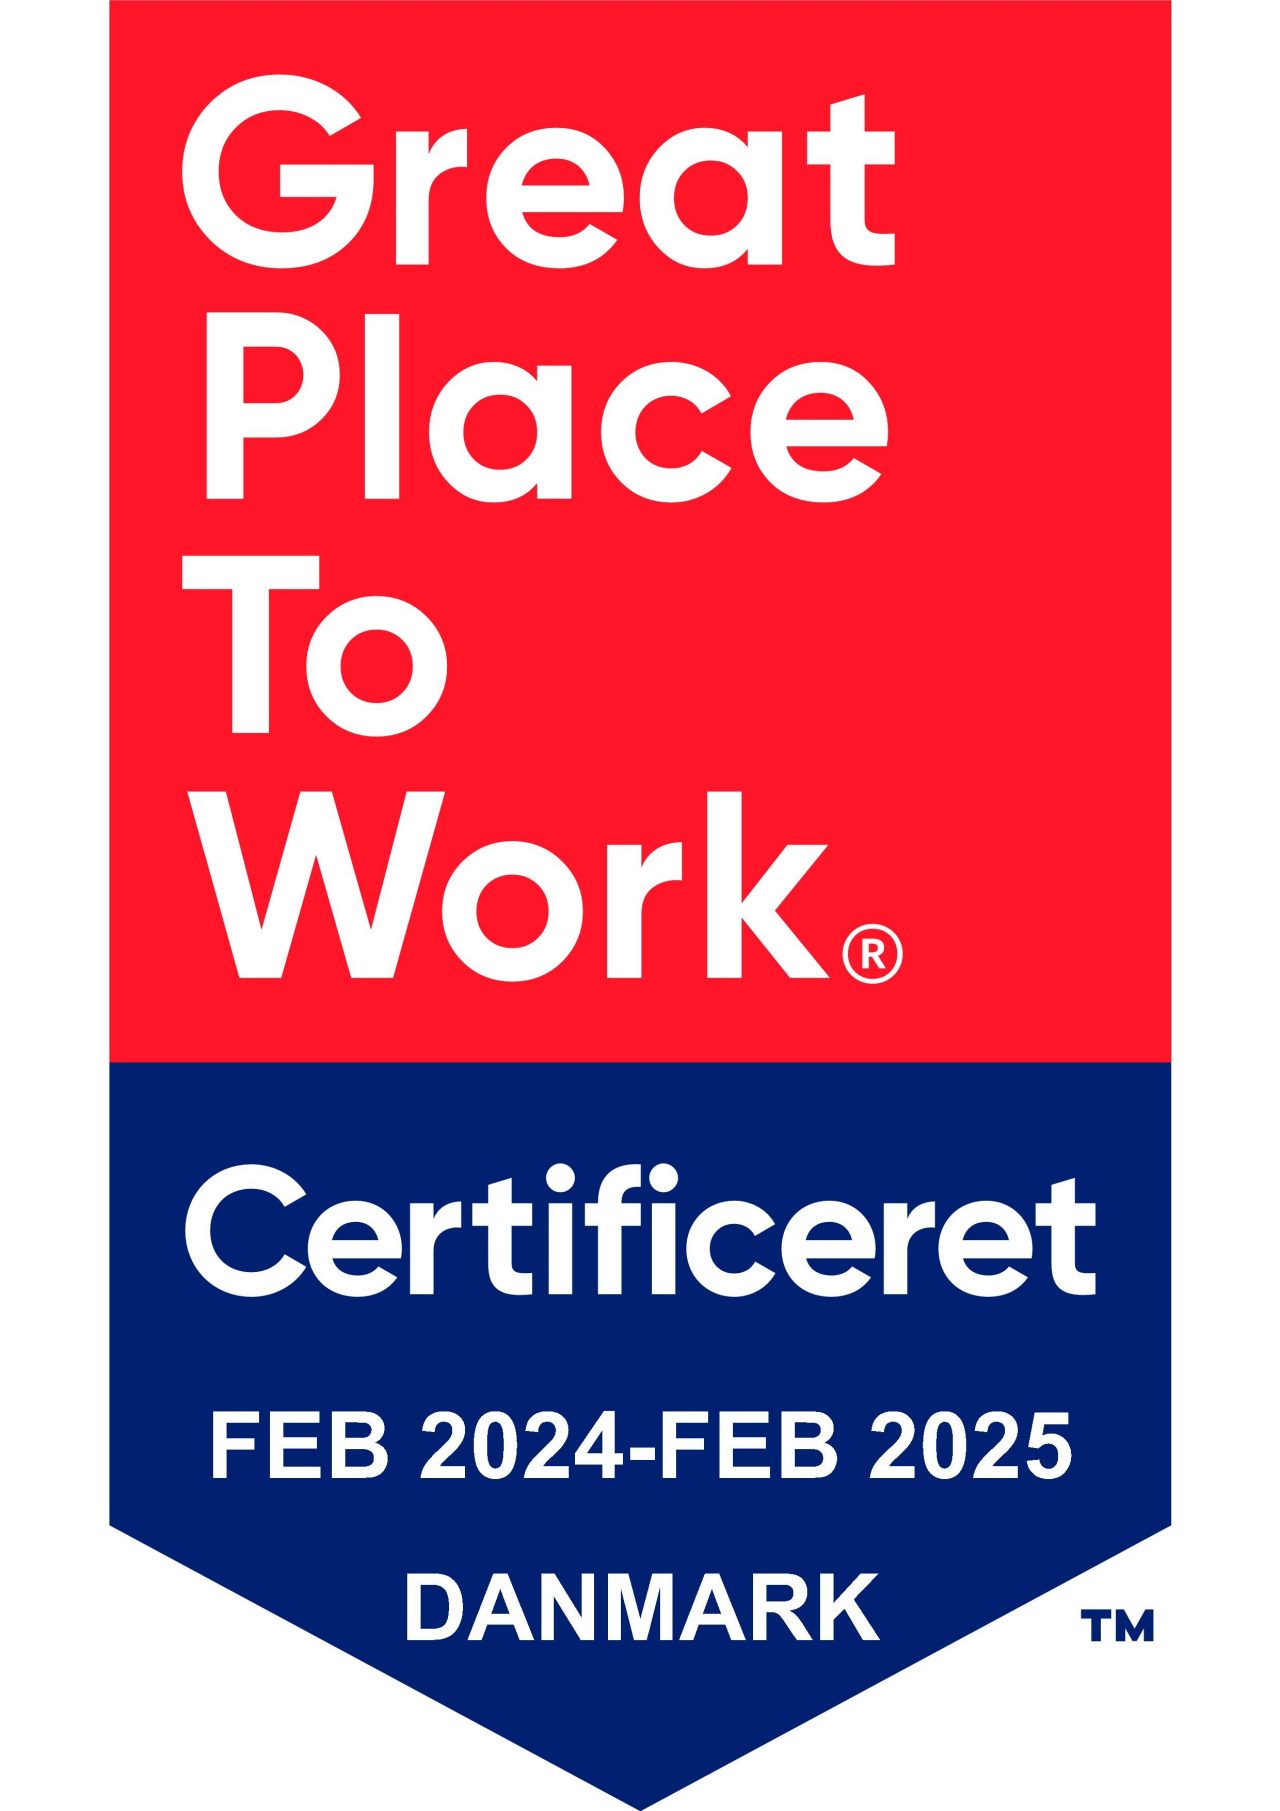 Great Place to Work Certification - Denmark